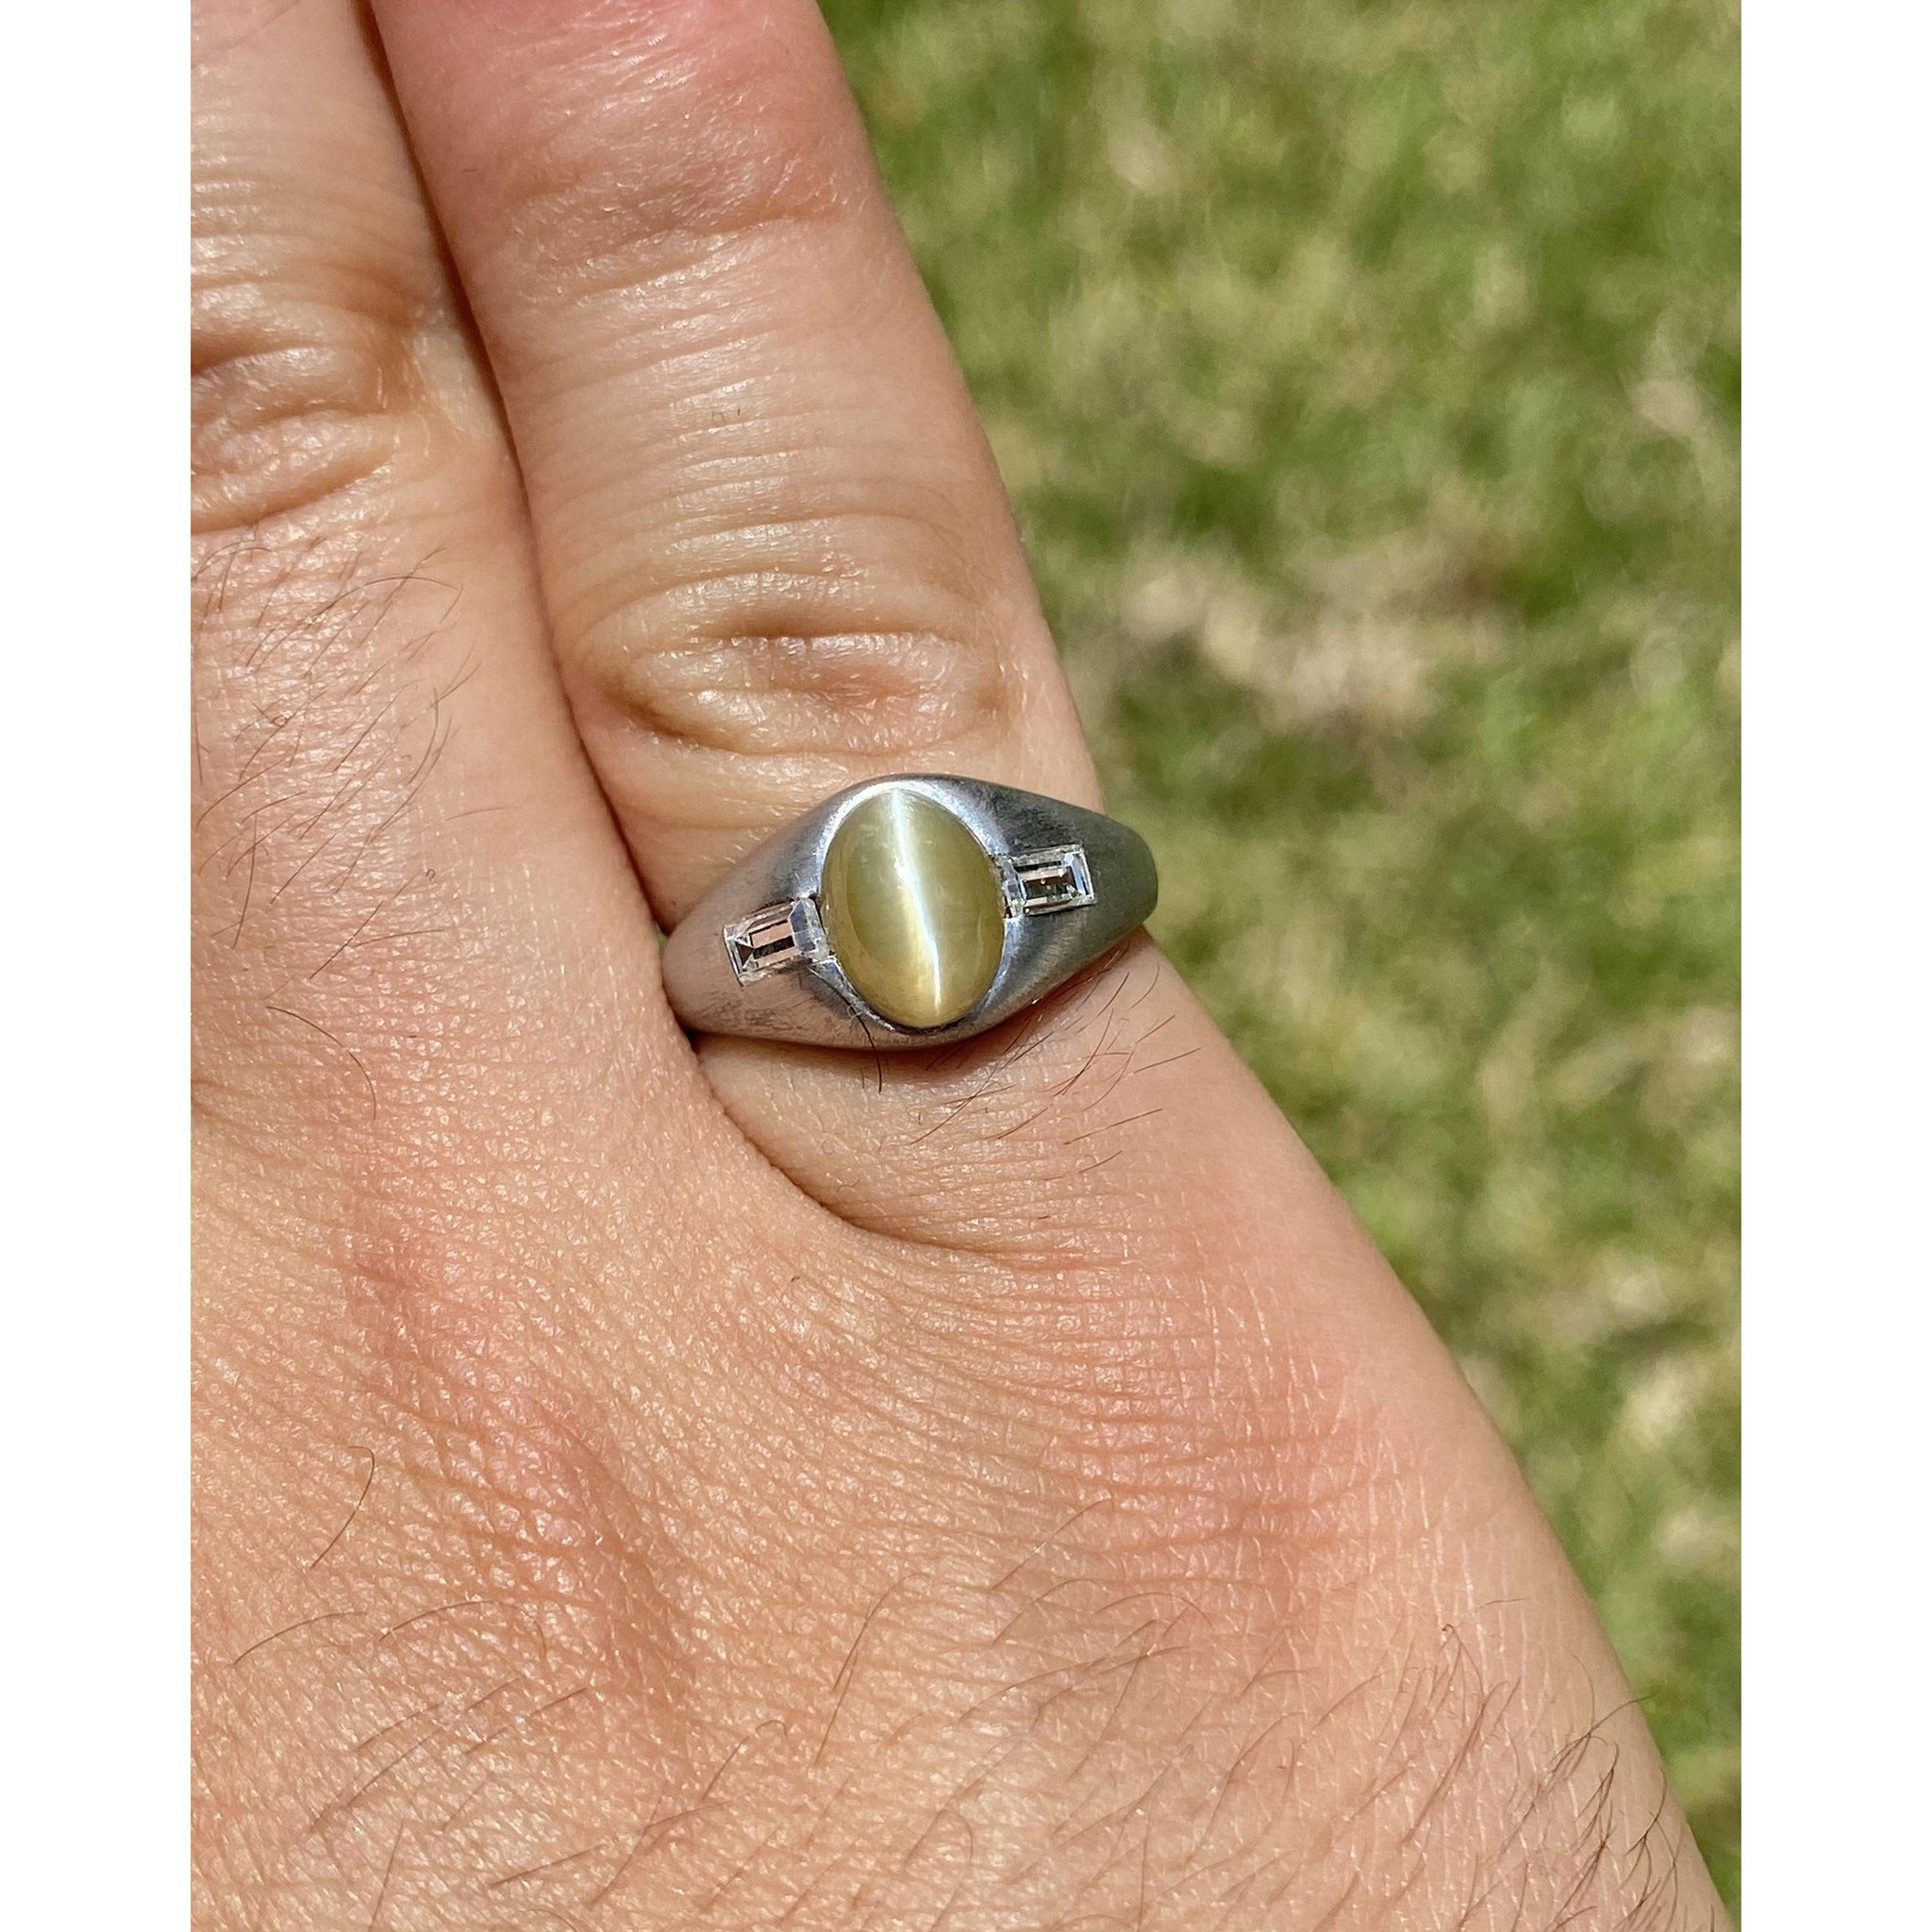 Buy Natural Certified Cat's Eye/lehsunia Rashi Ratan Astrological Purpose  Ring 925 Sterling Silver for Men/ Women Promise Ring Ring Mothers Day  Online in India - Etsy